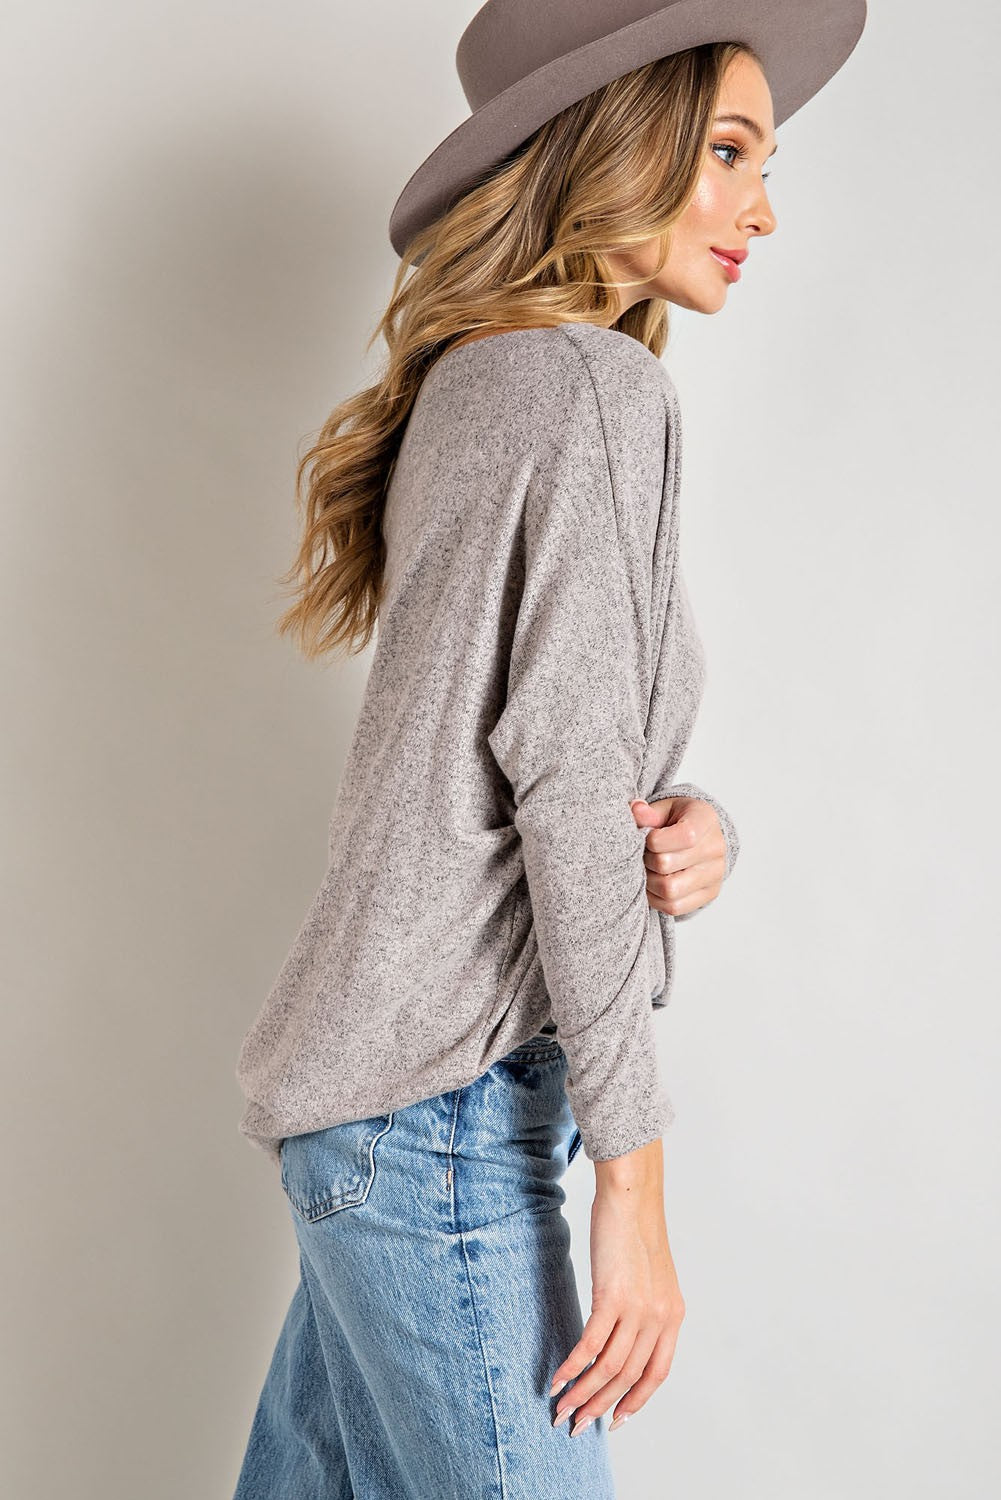 LONG SLEEVE OFF SHOULDER TUNIC TOP